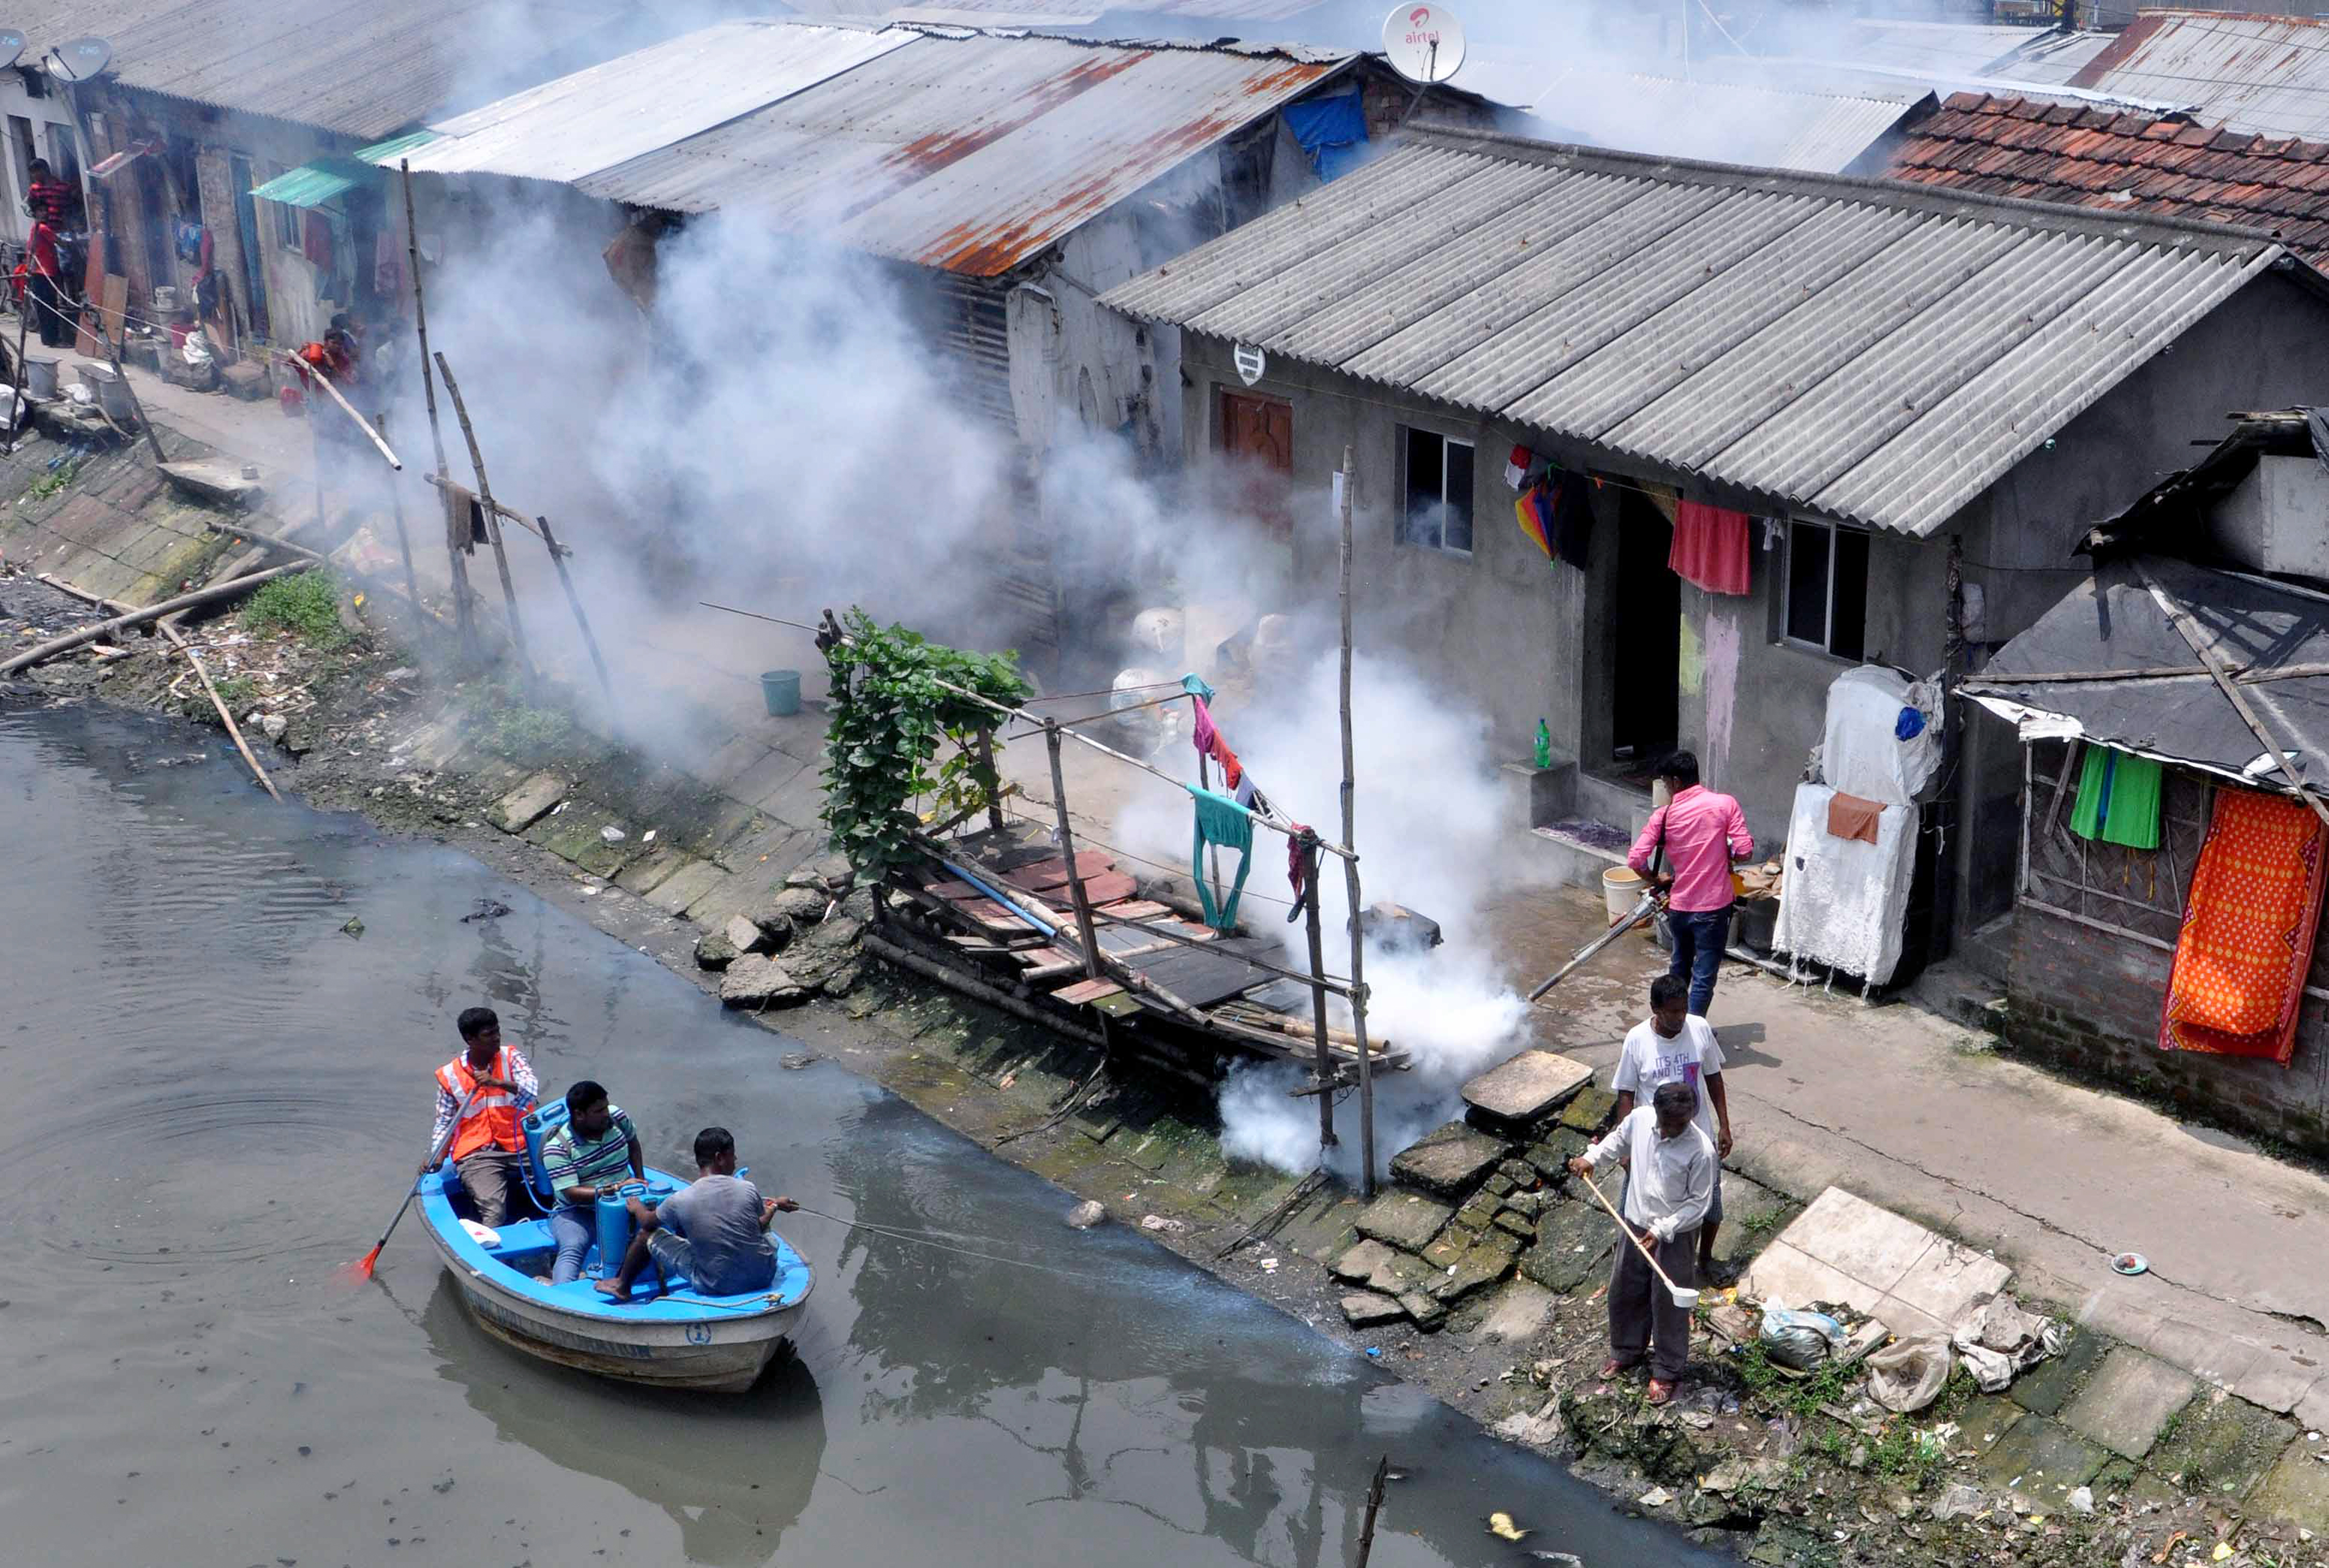 Municipal workers spray chemicals in canal and other worker fumigate slum area to kill mosquito in Kolkata. and malaria on August 9, 2017 in Kolkata. (Saikat Paul—Pacific Press/LightRocket/Getty Images)